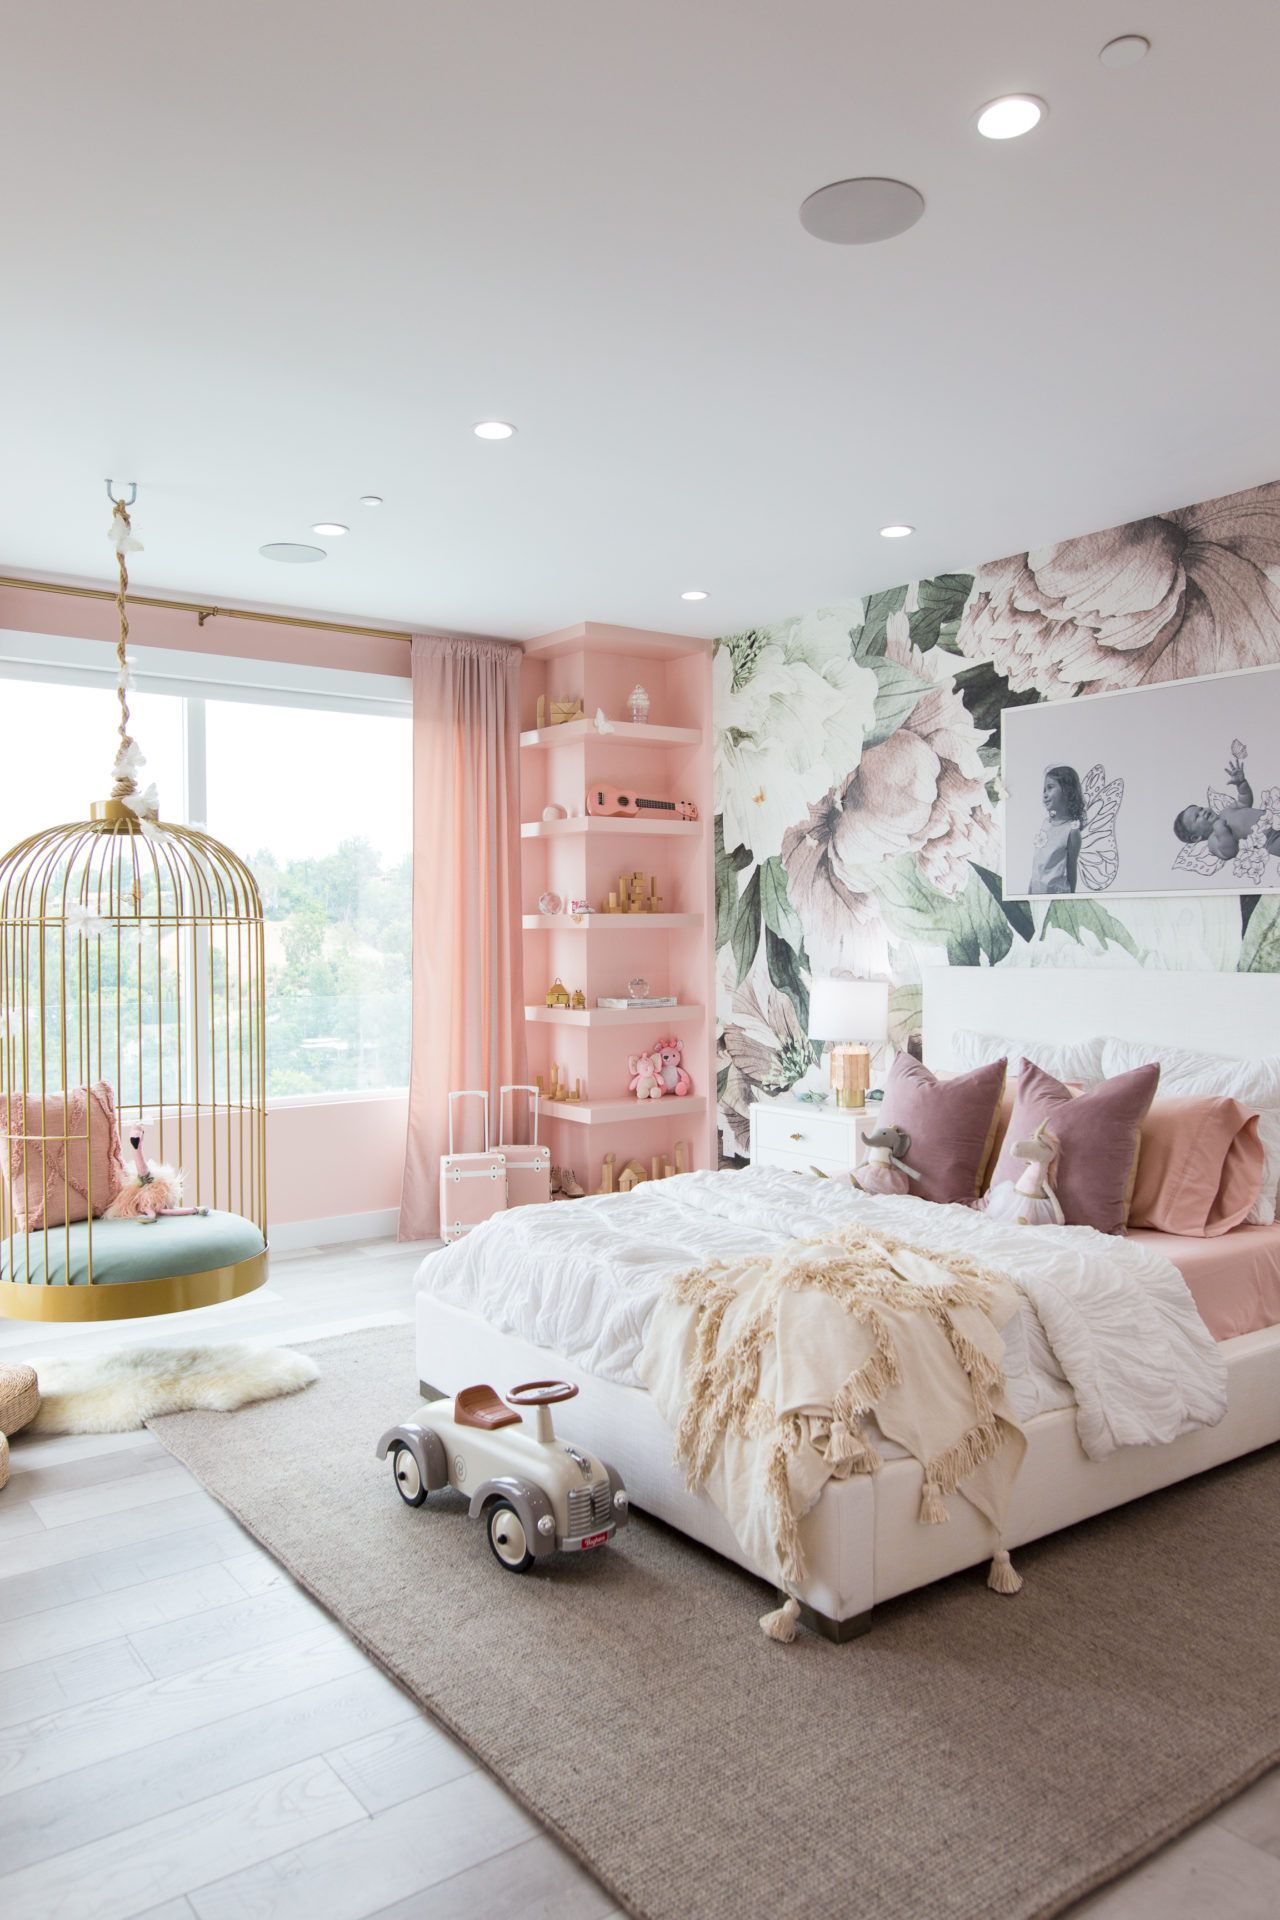 17 beauty for bedrooms ideas